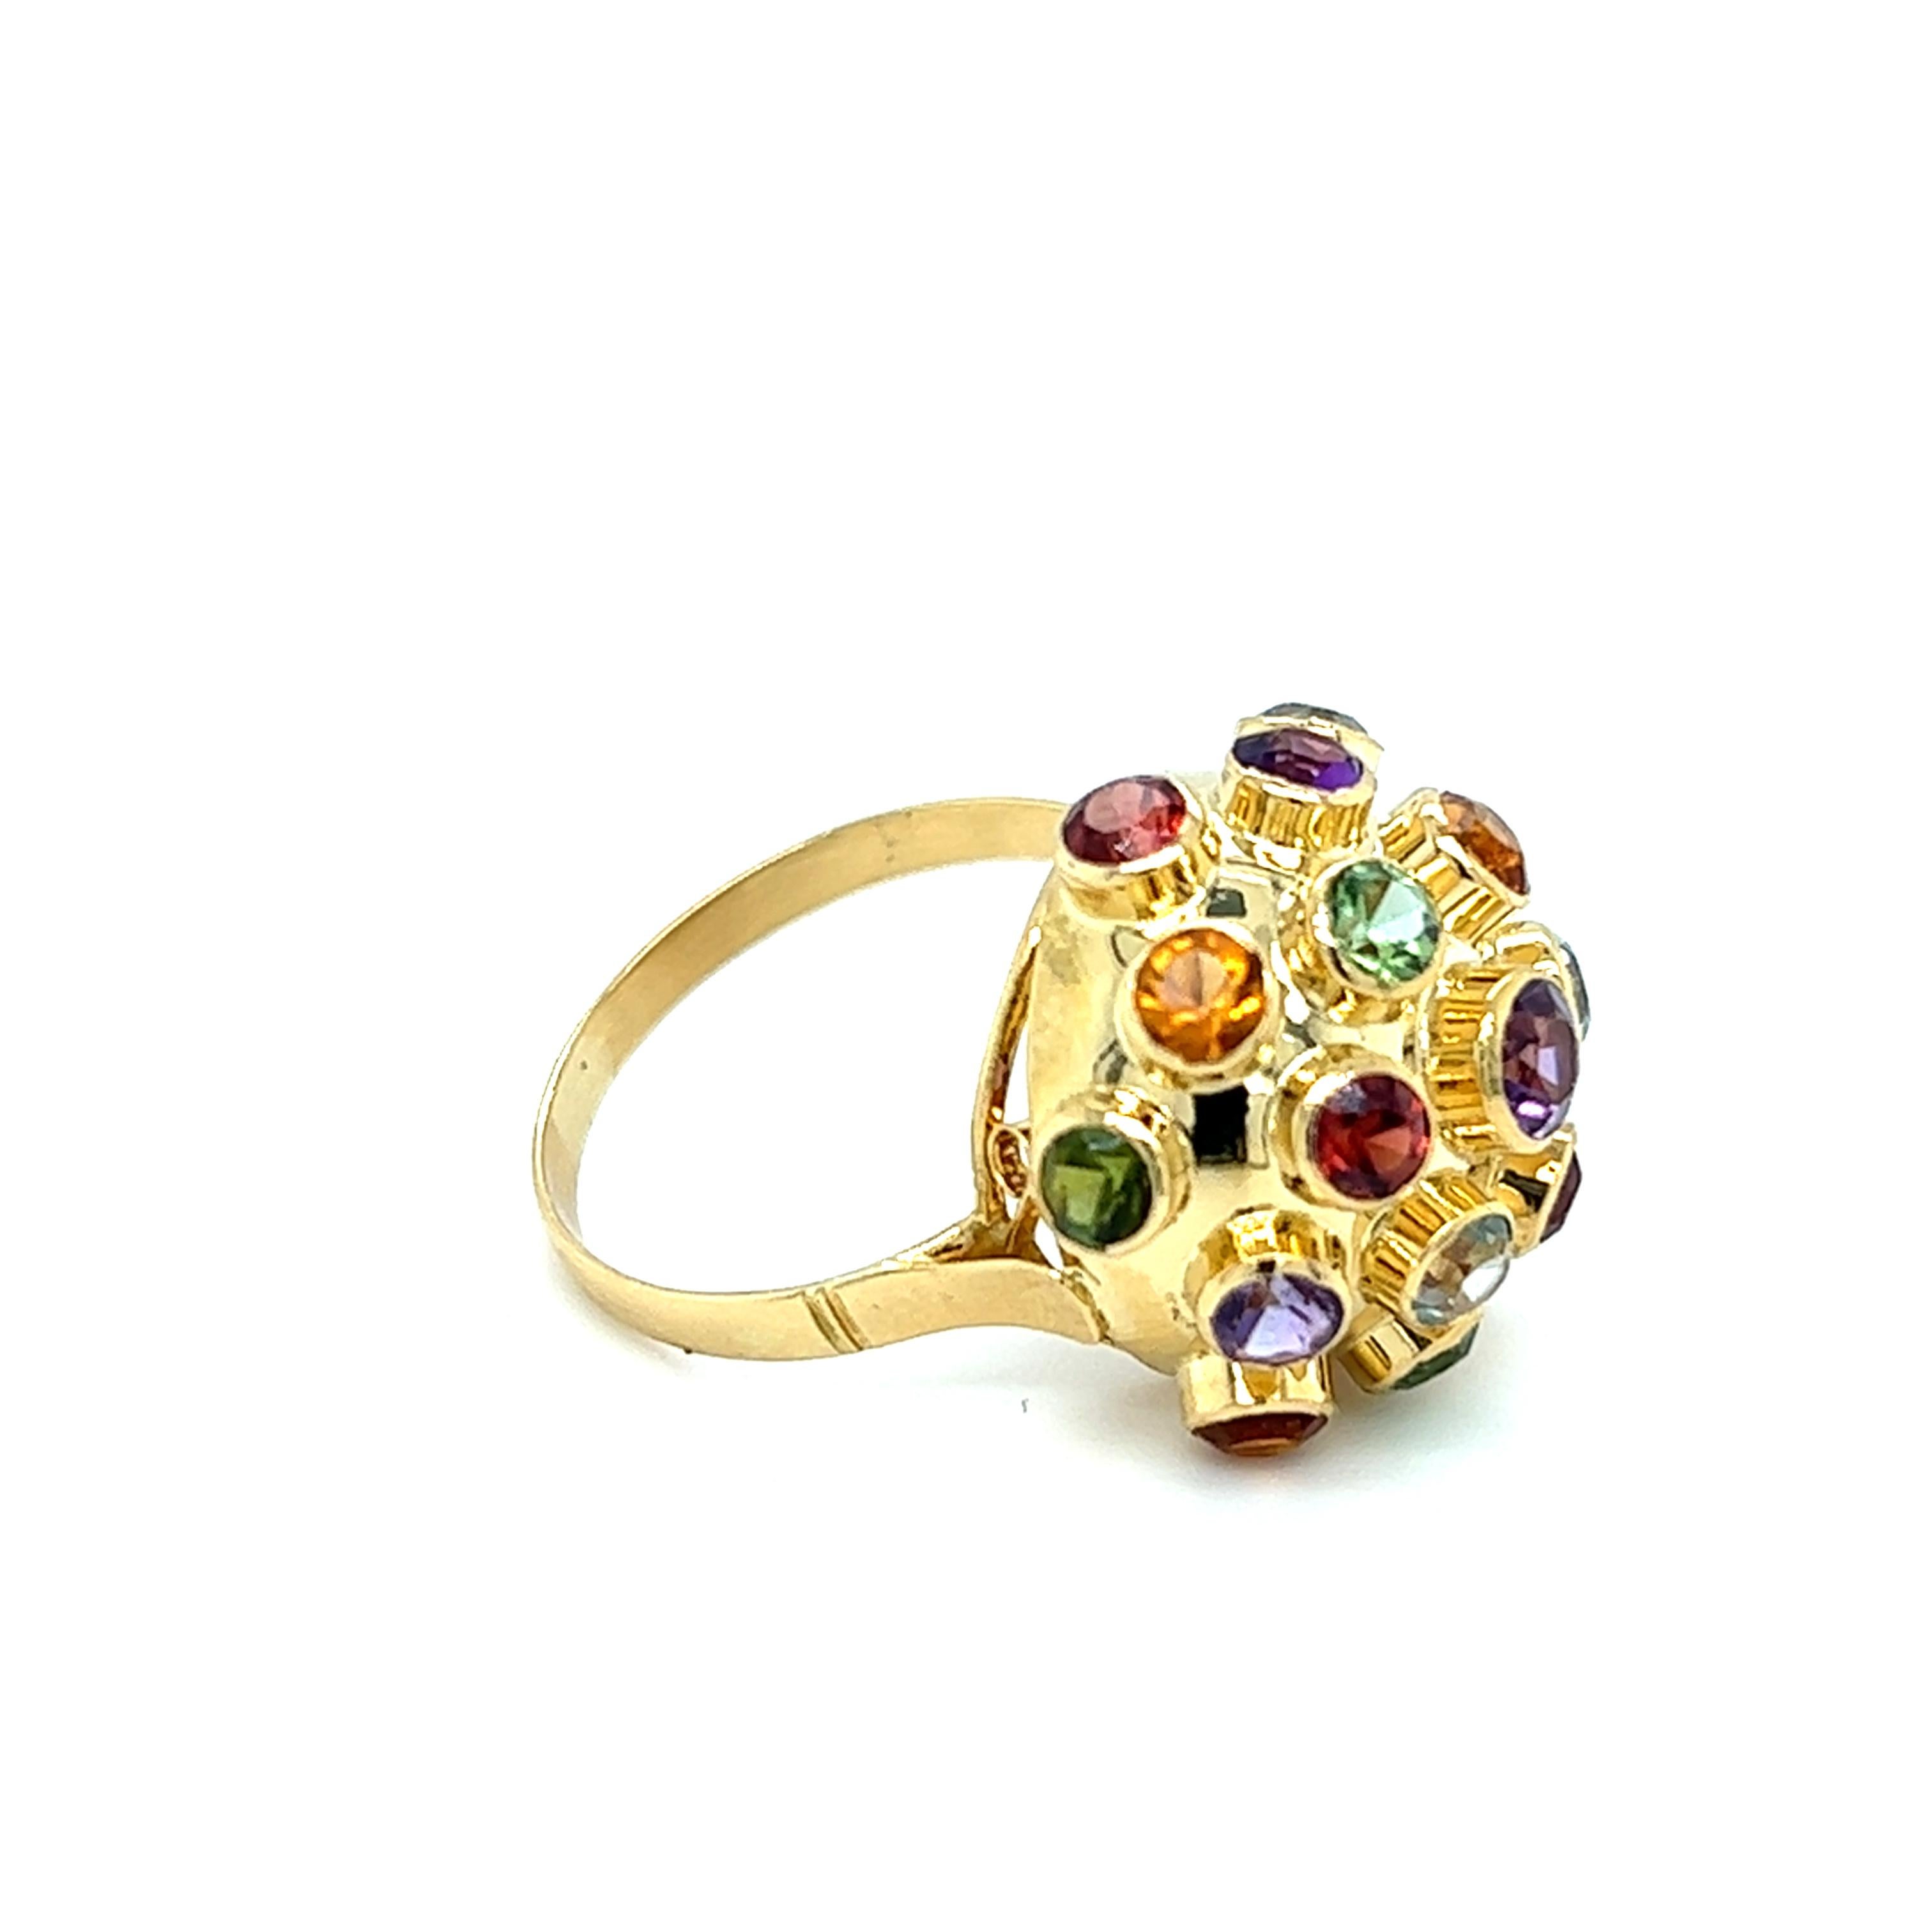 One 18-karat yellow gold Sputnik design dome ring by Brazilian designer H. Stern, set with nineteen (19) 3.5mm bezel set round gemstones.  The ring contains four (4) amethyst,  four (4) peridot,  three (3) citrine,  three (3) aquamarine, and five